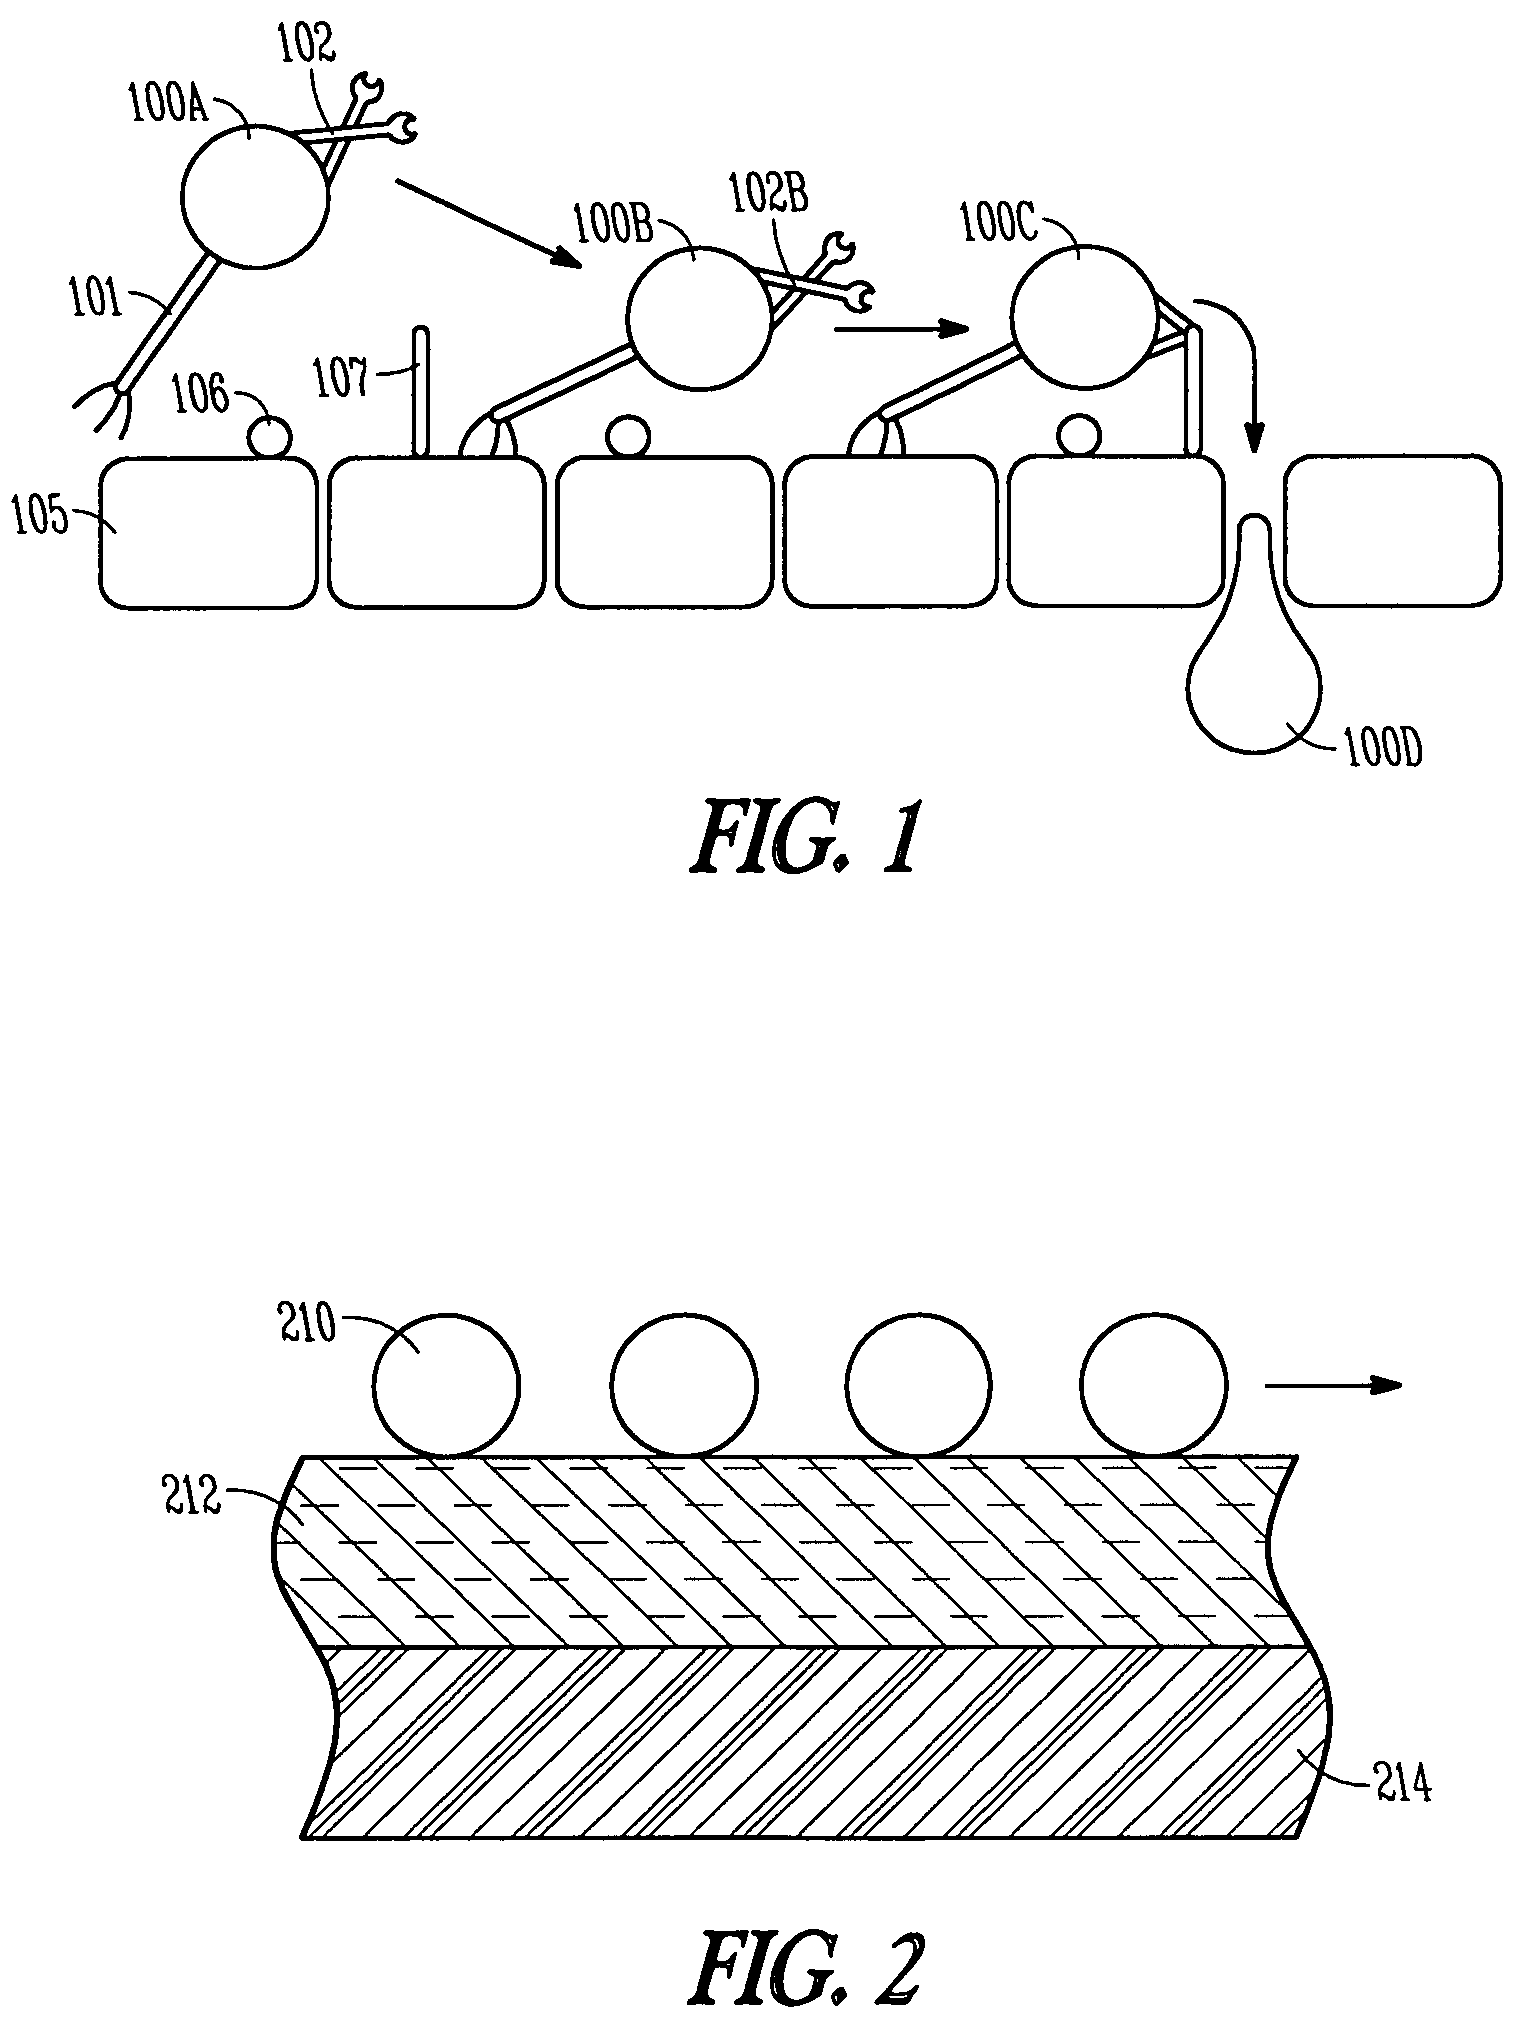 Methods and devices to regulate stem cell homing